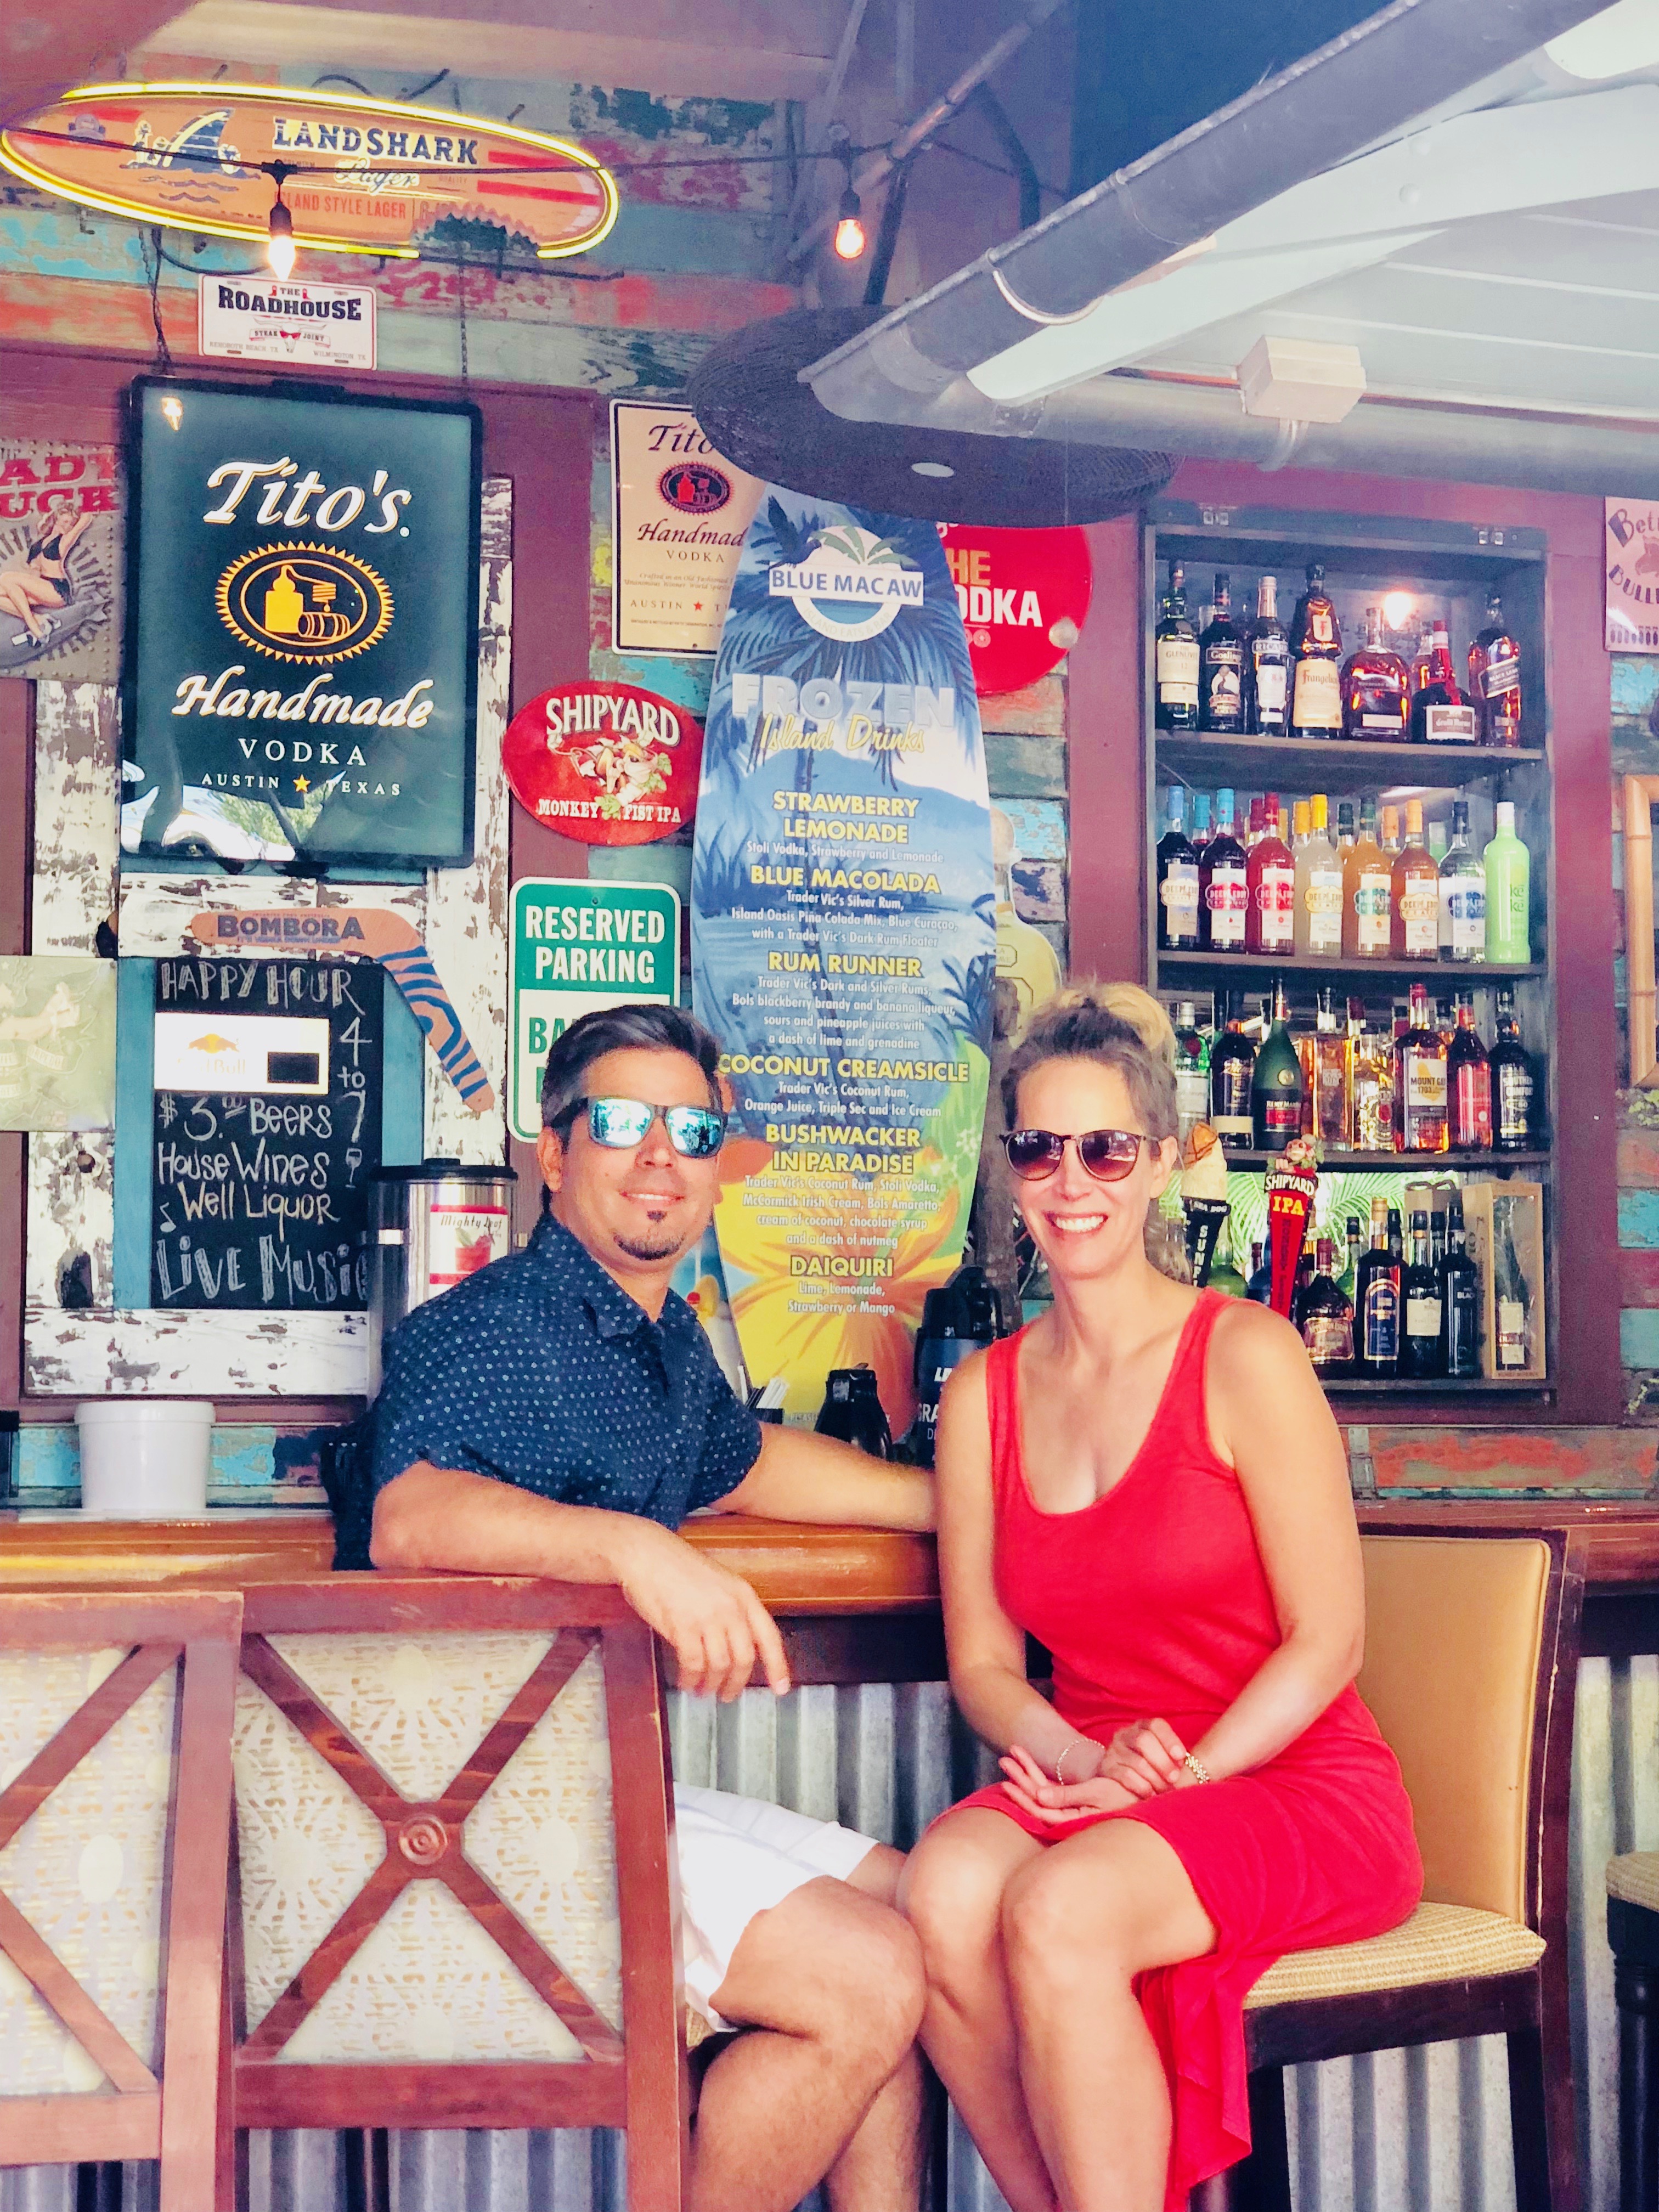 Lori Dennis and Roy in key West